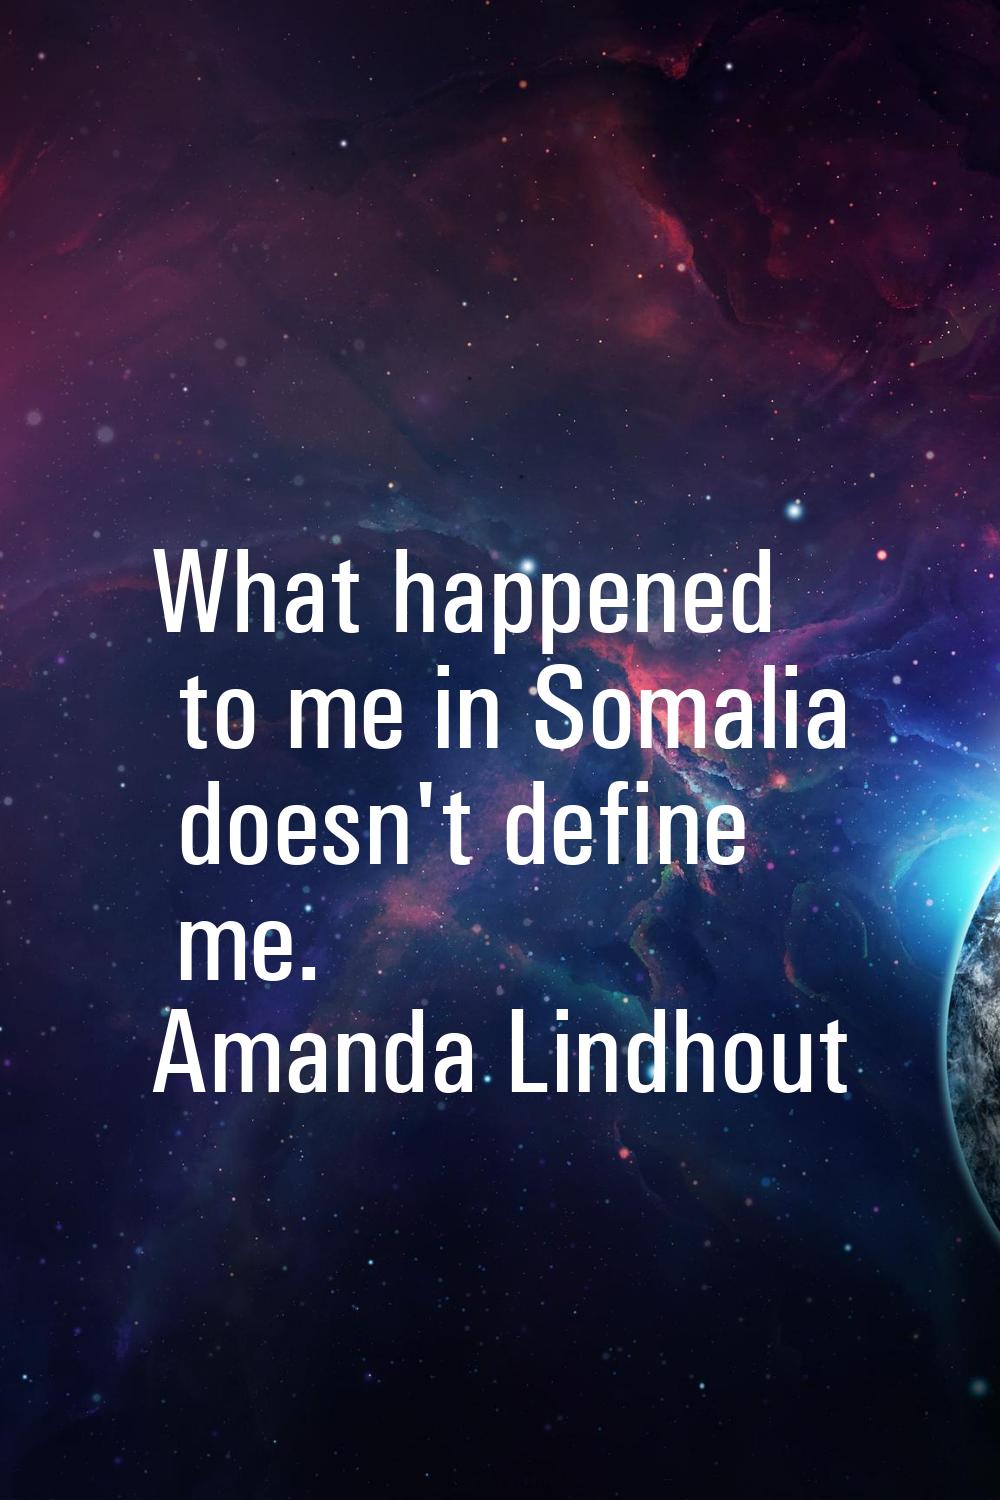 What happened to me in Somalia doesn't define me.